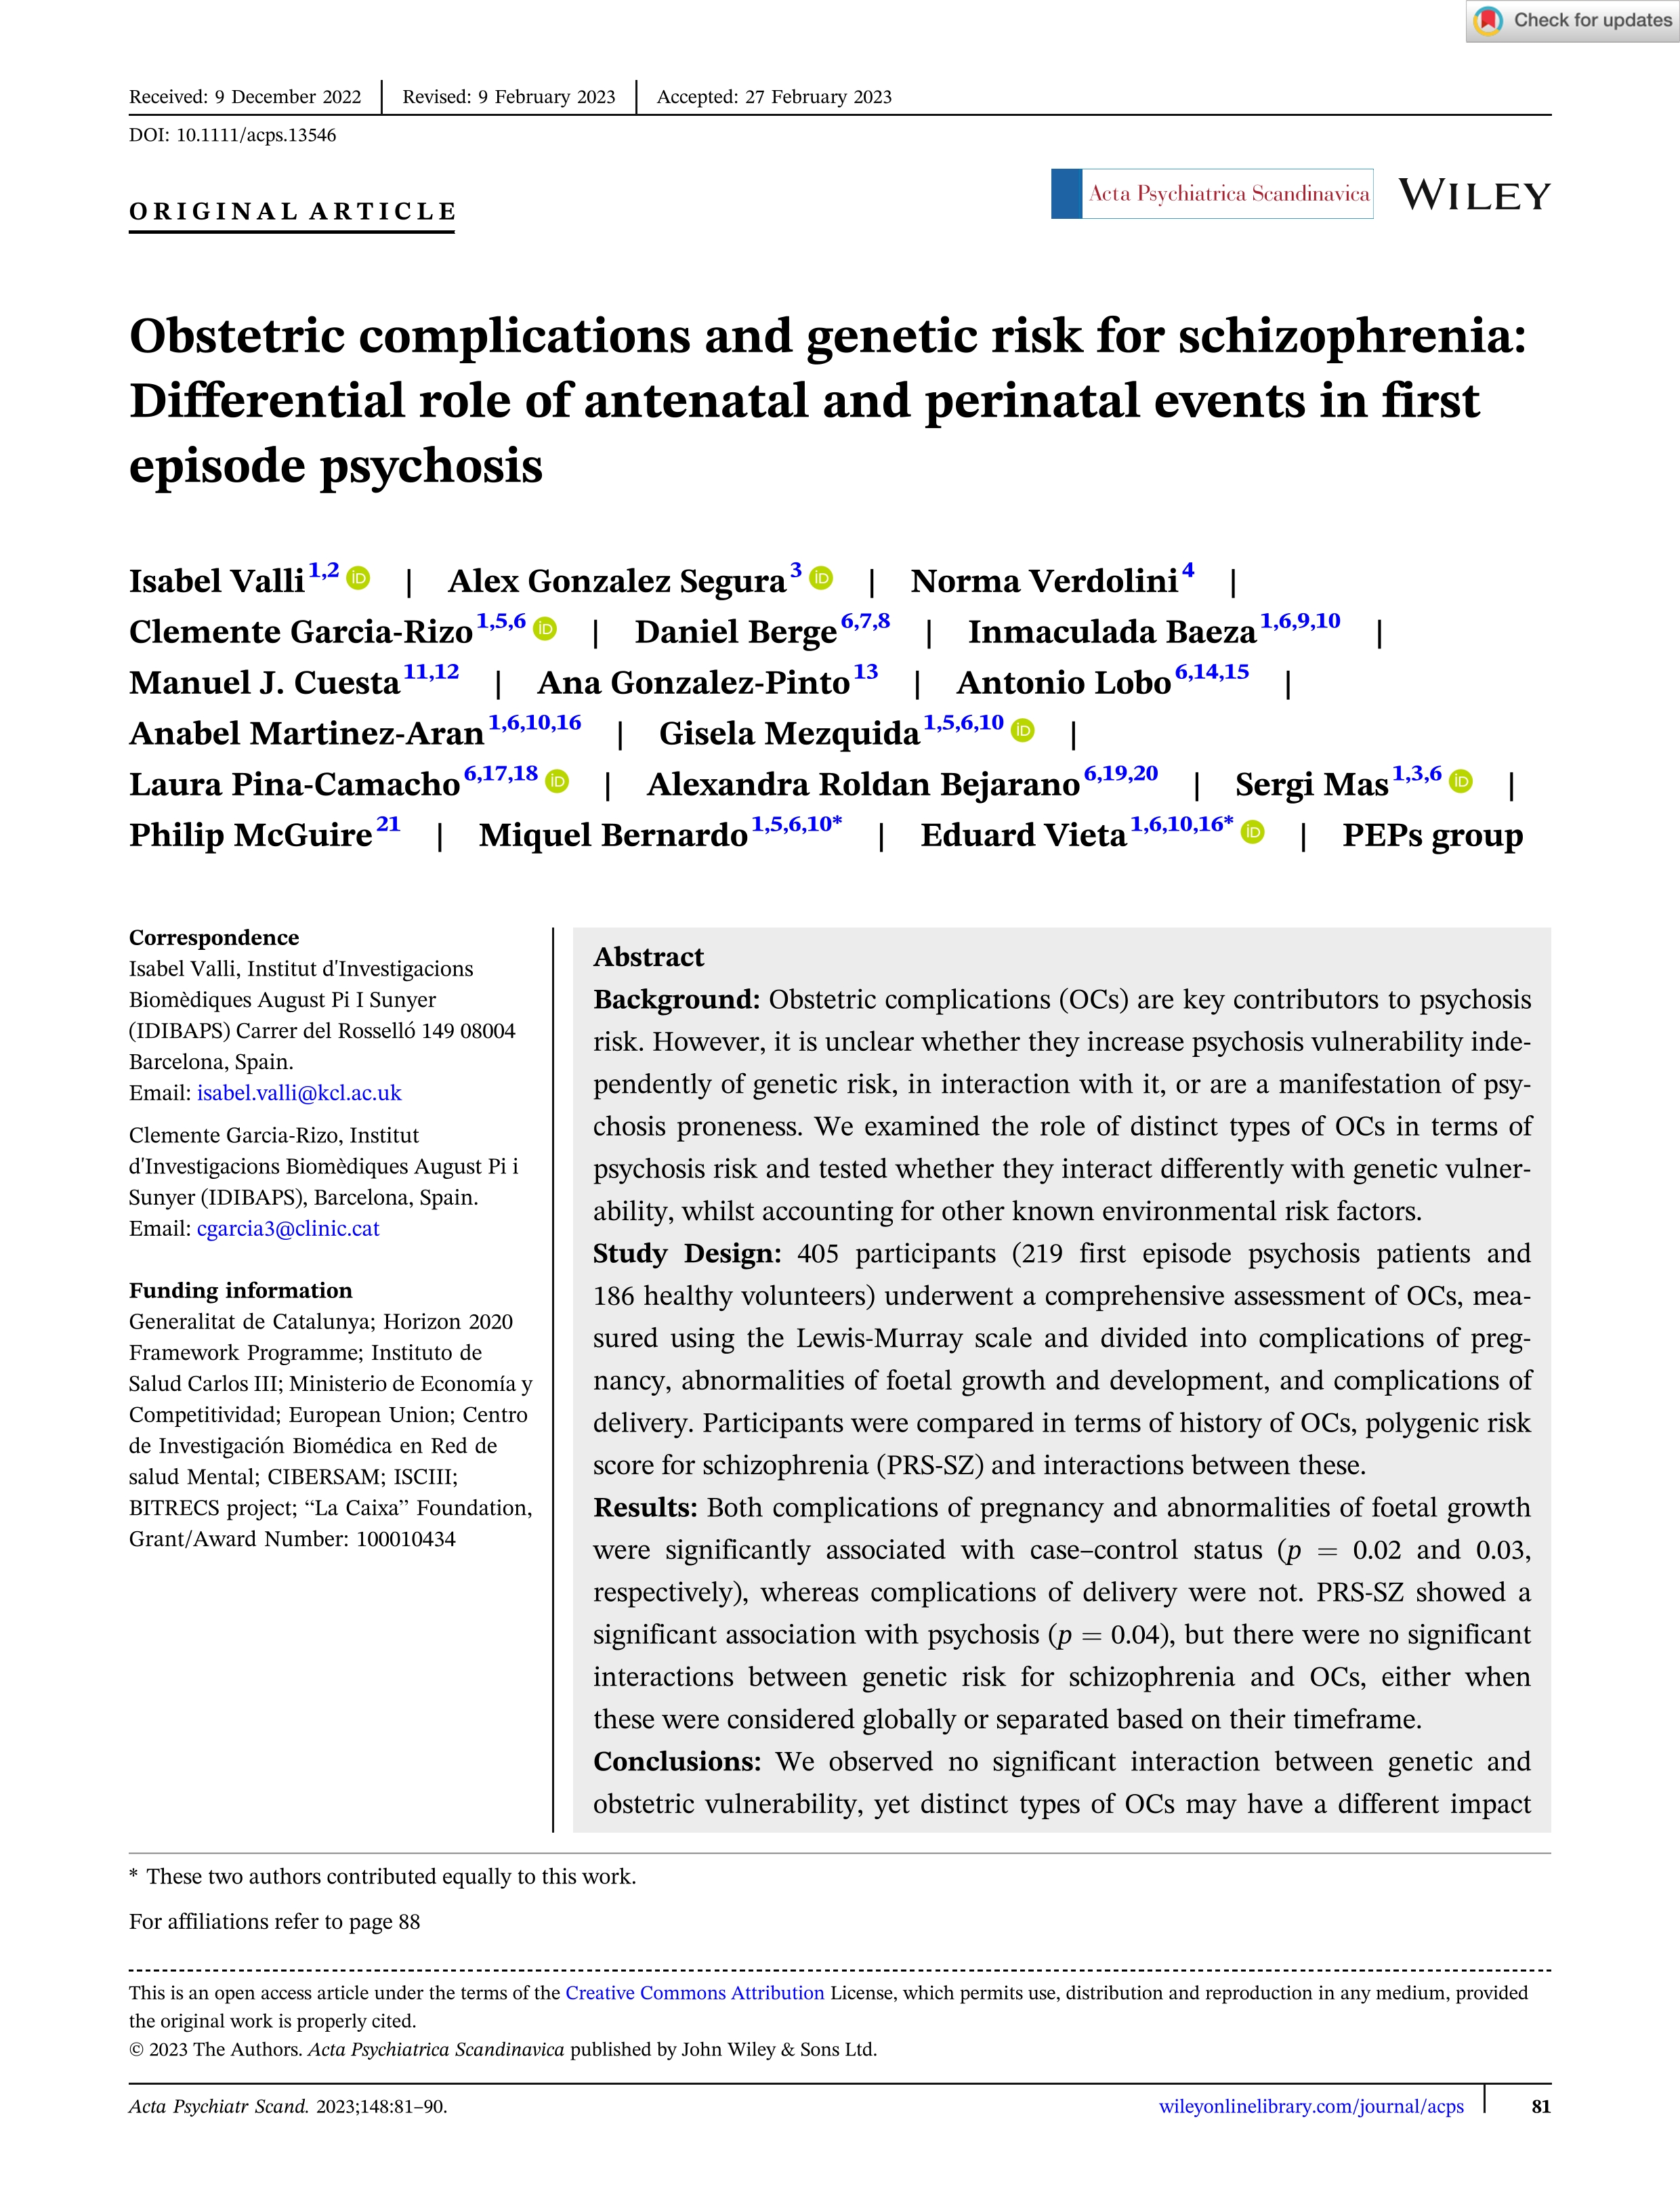 Obstetric complications and genetic risk for schizophrenia: Differential role of antenatal and perinatal events in first episode psychosis